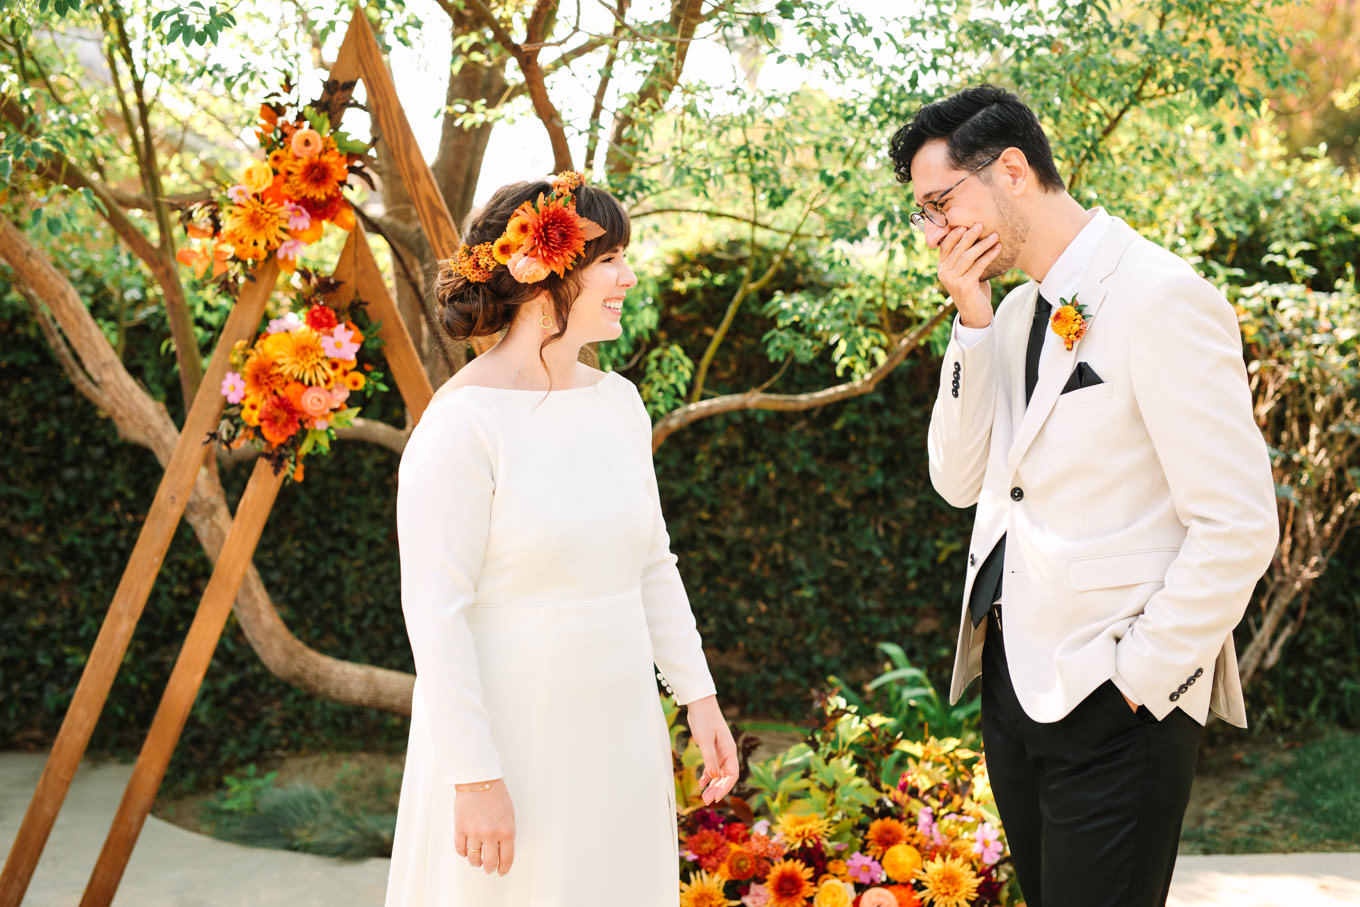 Groom's reaction to bride's first look | Vibrant backyard micro wedding featured on Green Wedding Shoes | Colorful LA wedding photography | #losangeleswedding #backyardwedding #microwedding #laweddingphotographer Source: Mary Costa Photography | Los Angeles